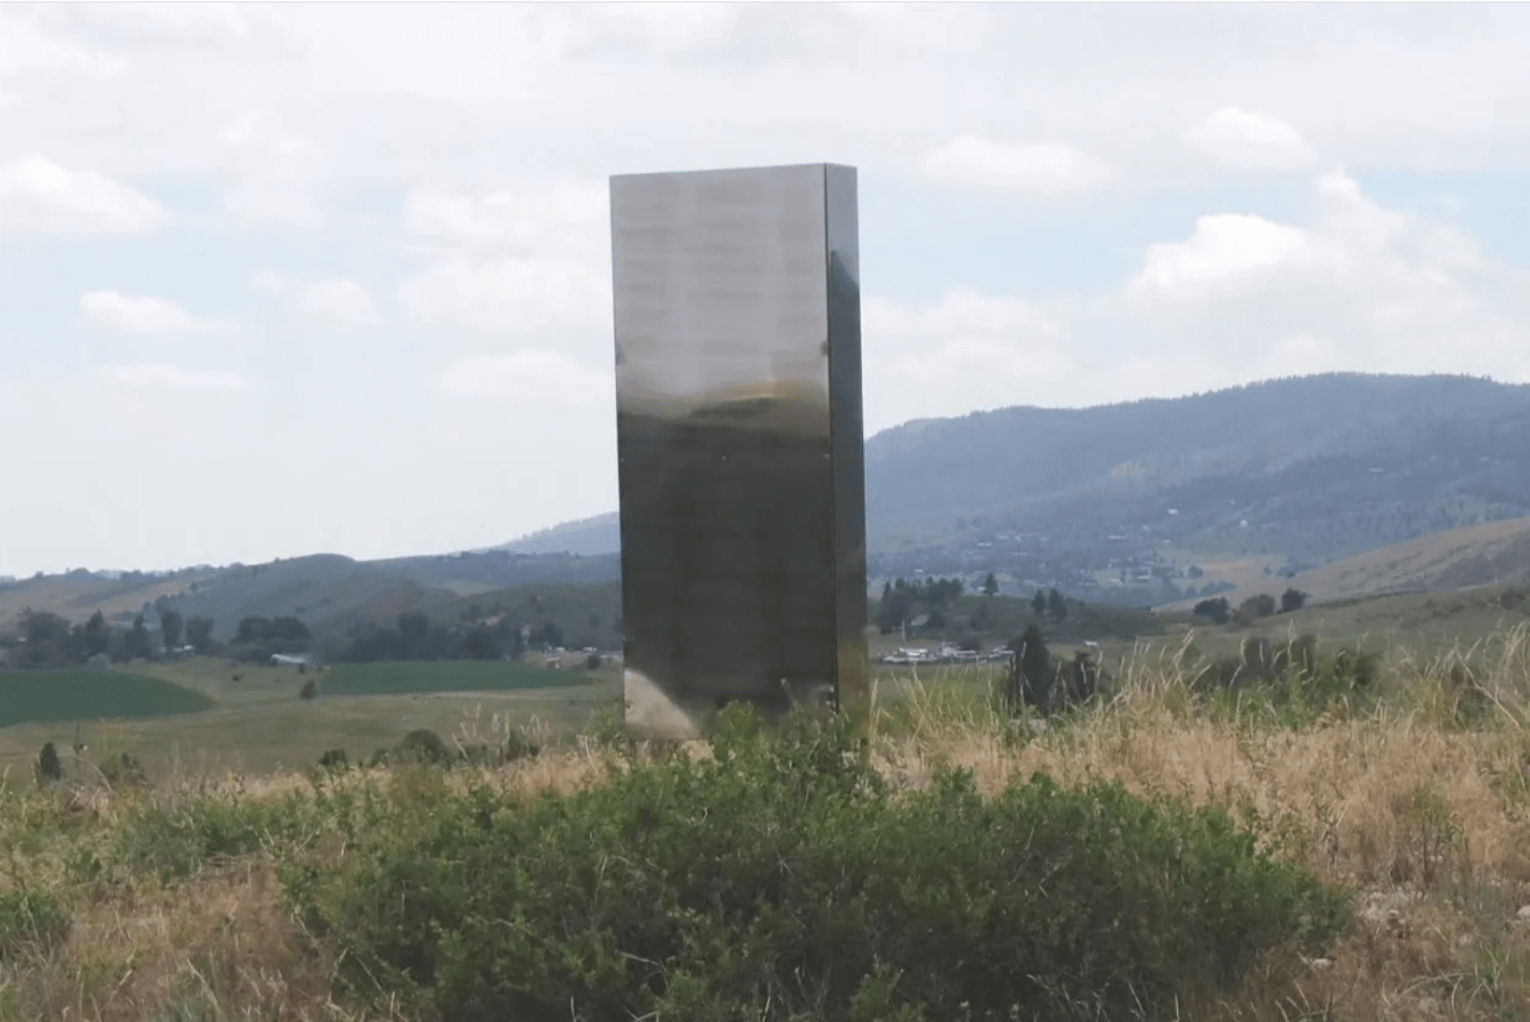 Another Unexplainable Monolith Appears